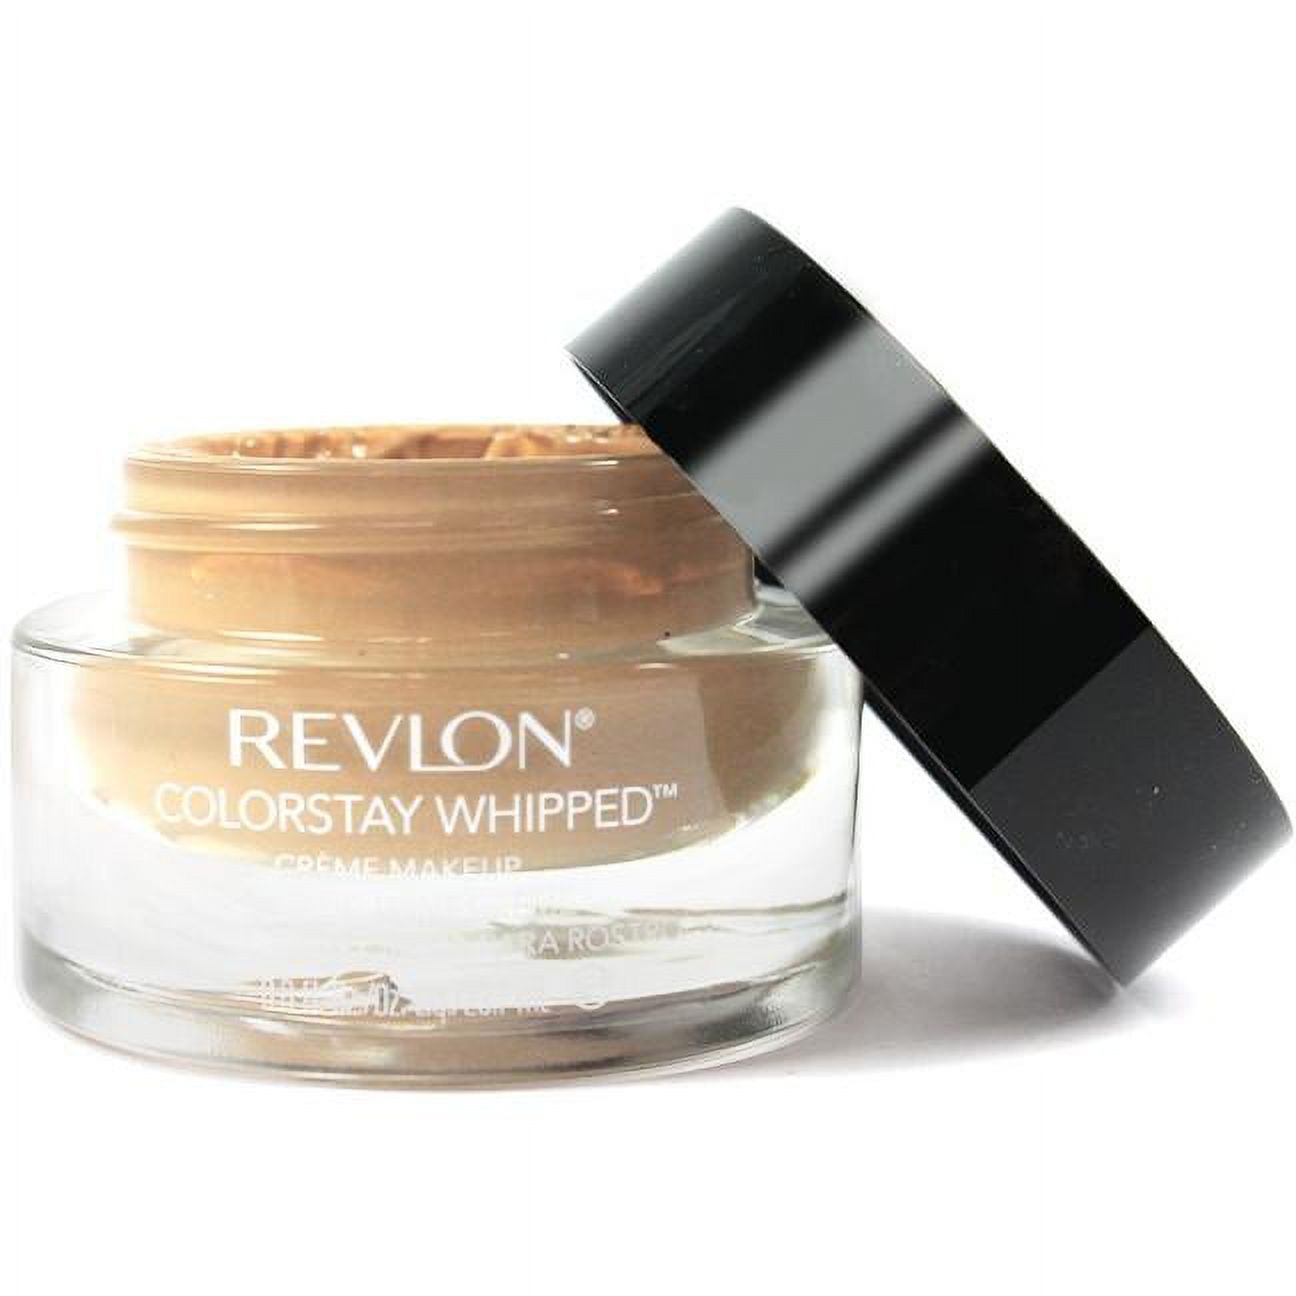 Revlon ColorStay Whipped Creme Makeup, Warm Golden - image 5 of 15